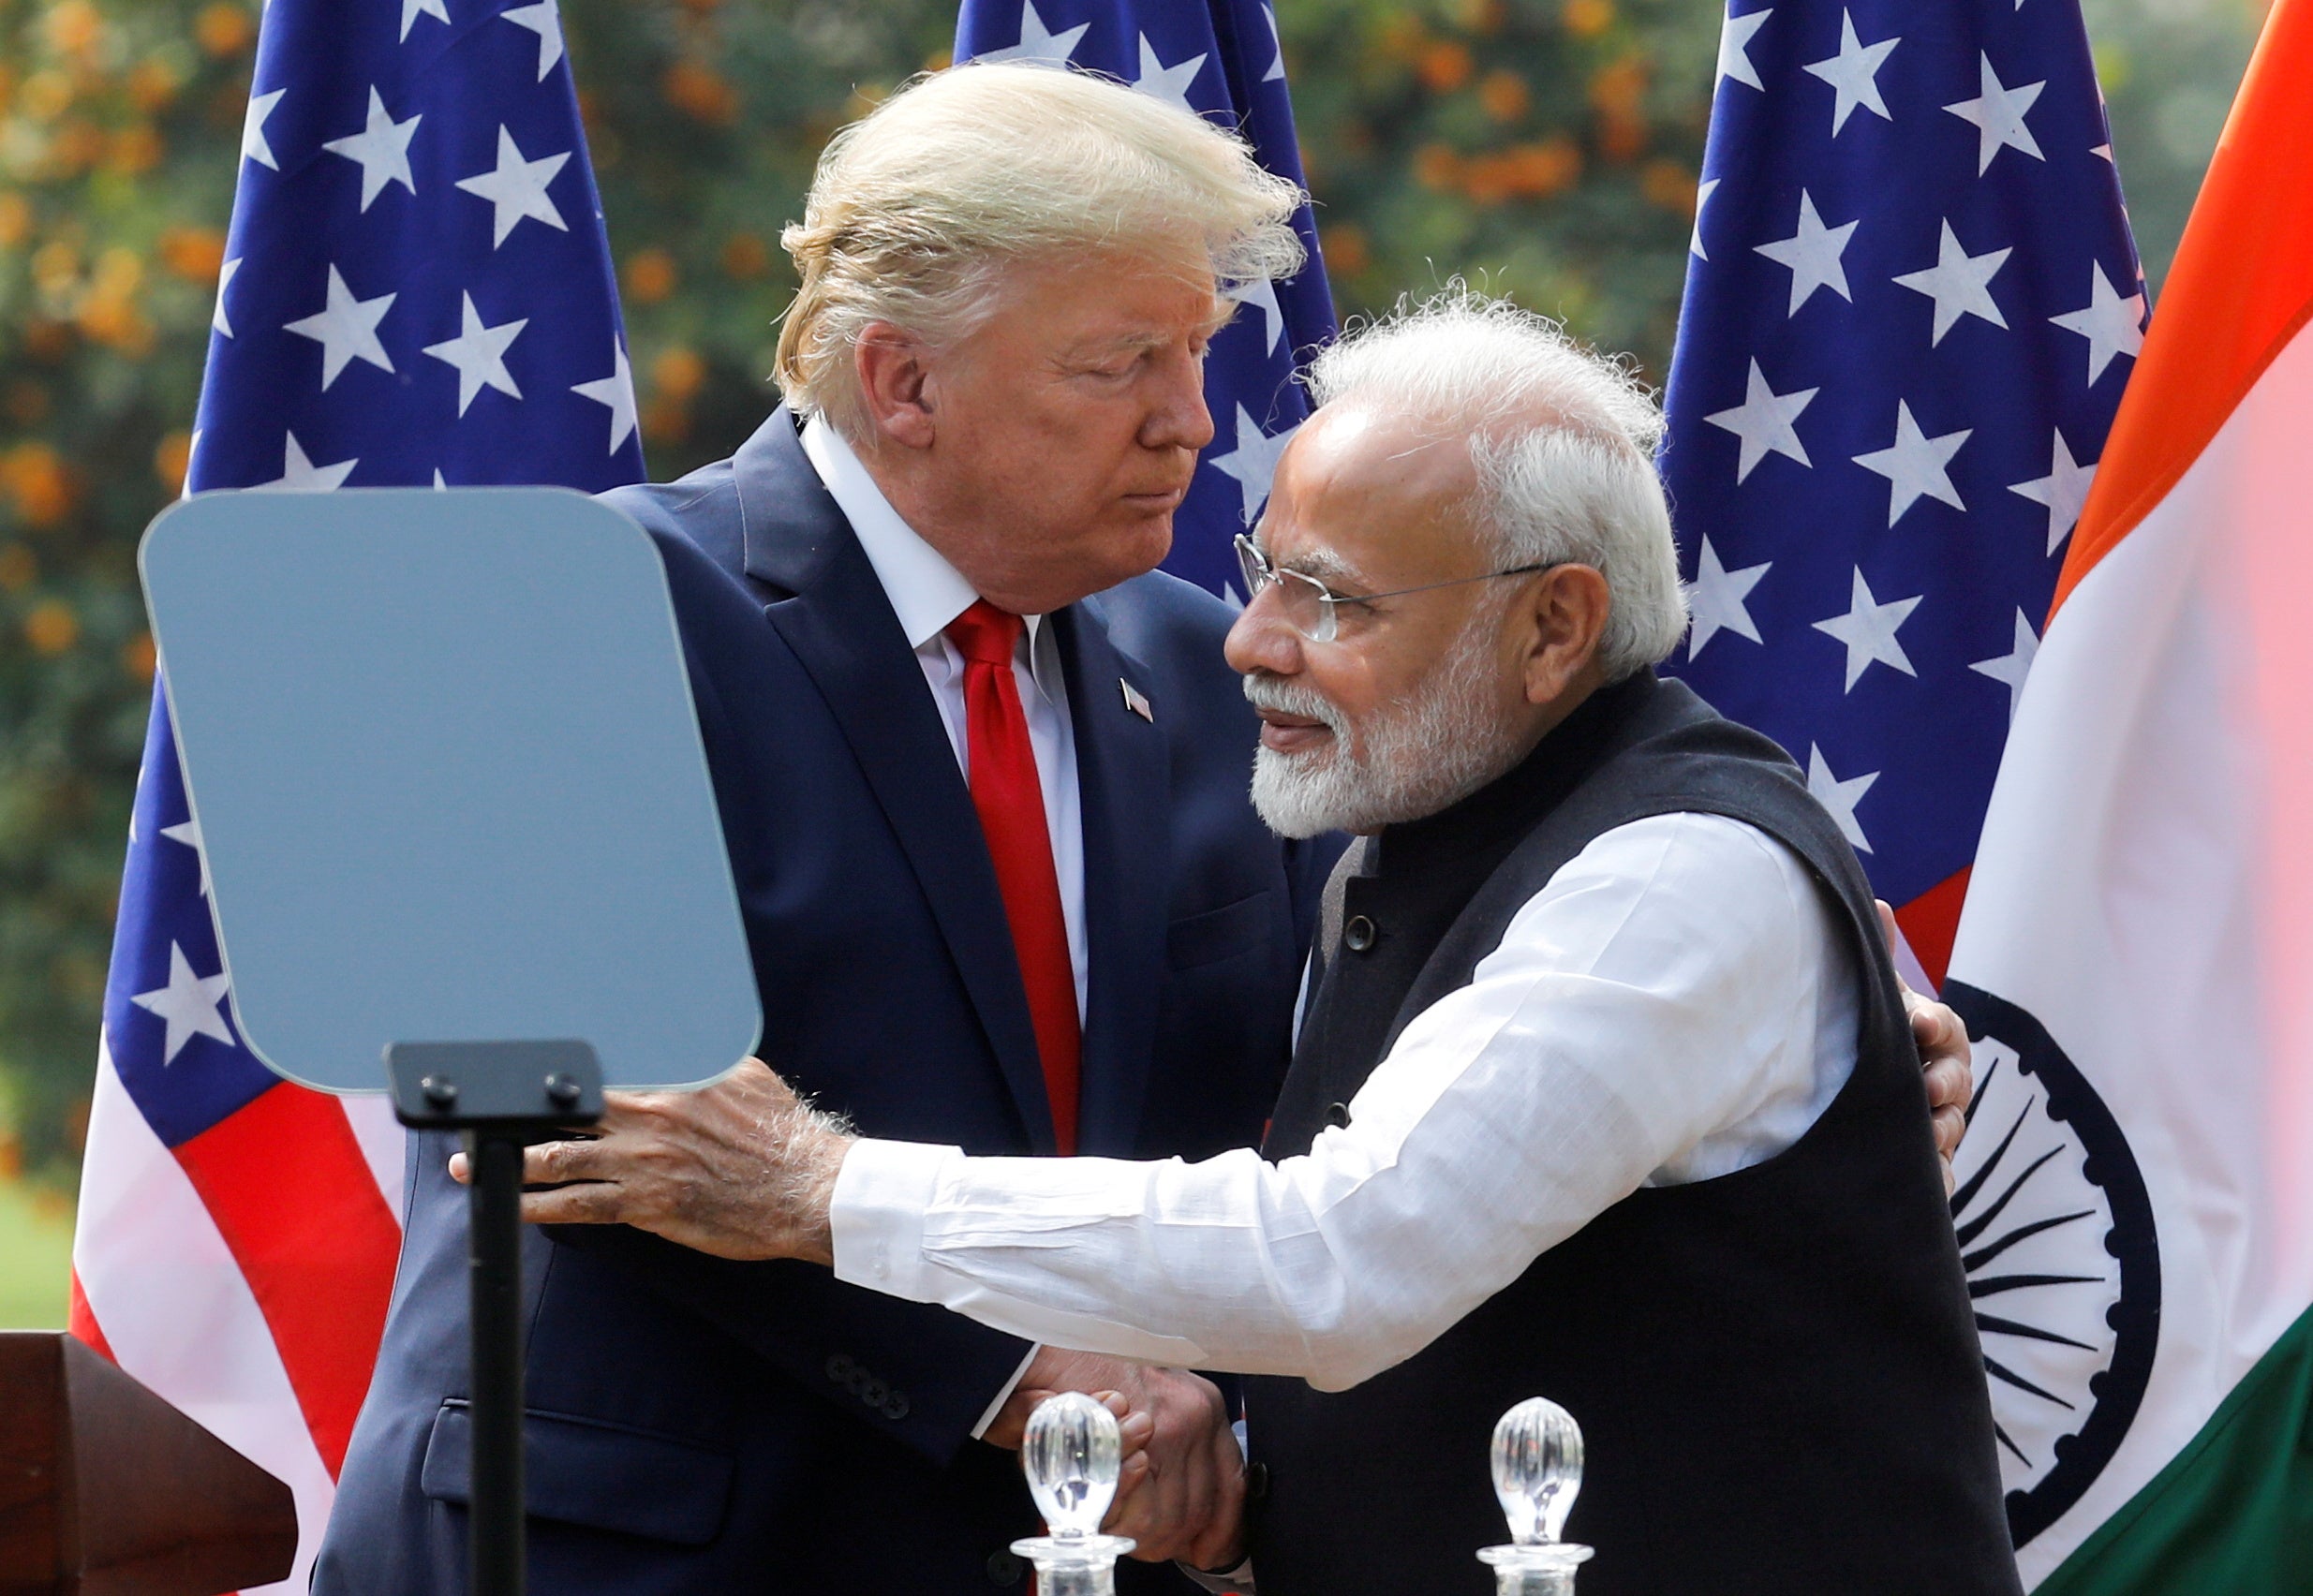 US President Donald Trump and India’s Prime Minister Narendra Modi embrace during a joint news conference after bilateral talks at Hyderabad House in New Delhi, India, February 25, 2020. (REUTERS/Adnan Abidi/File Photo)